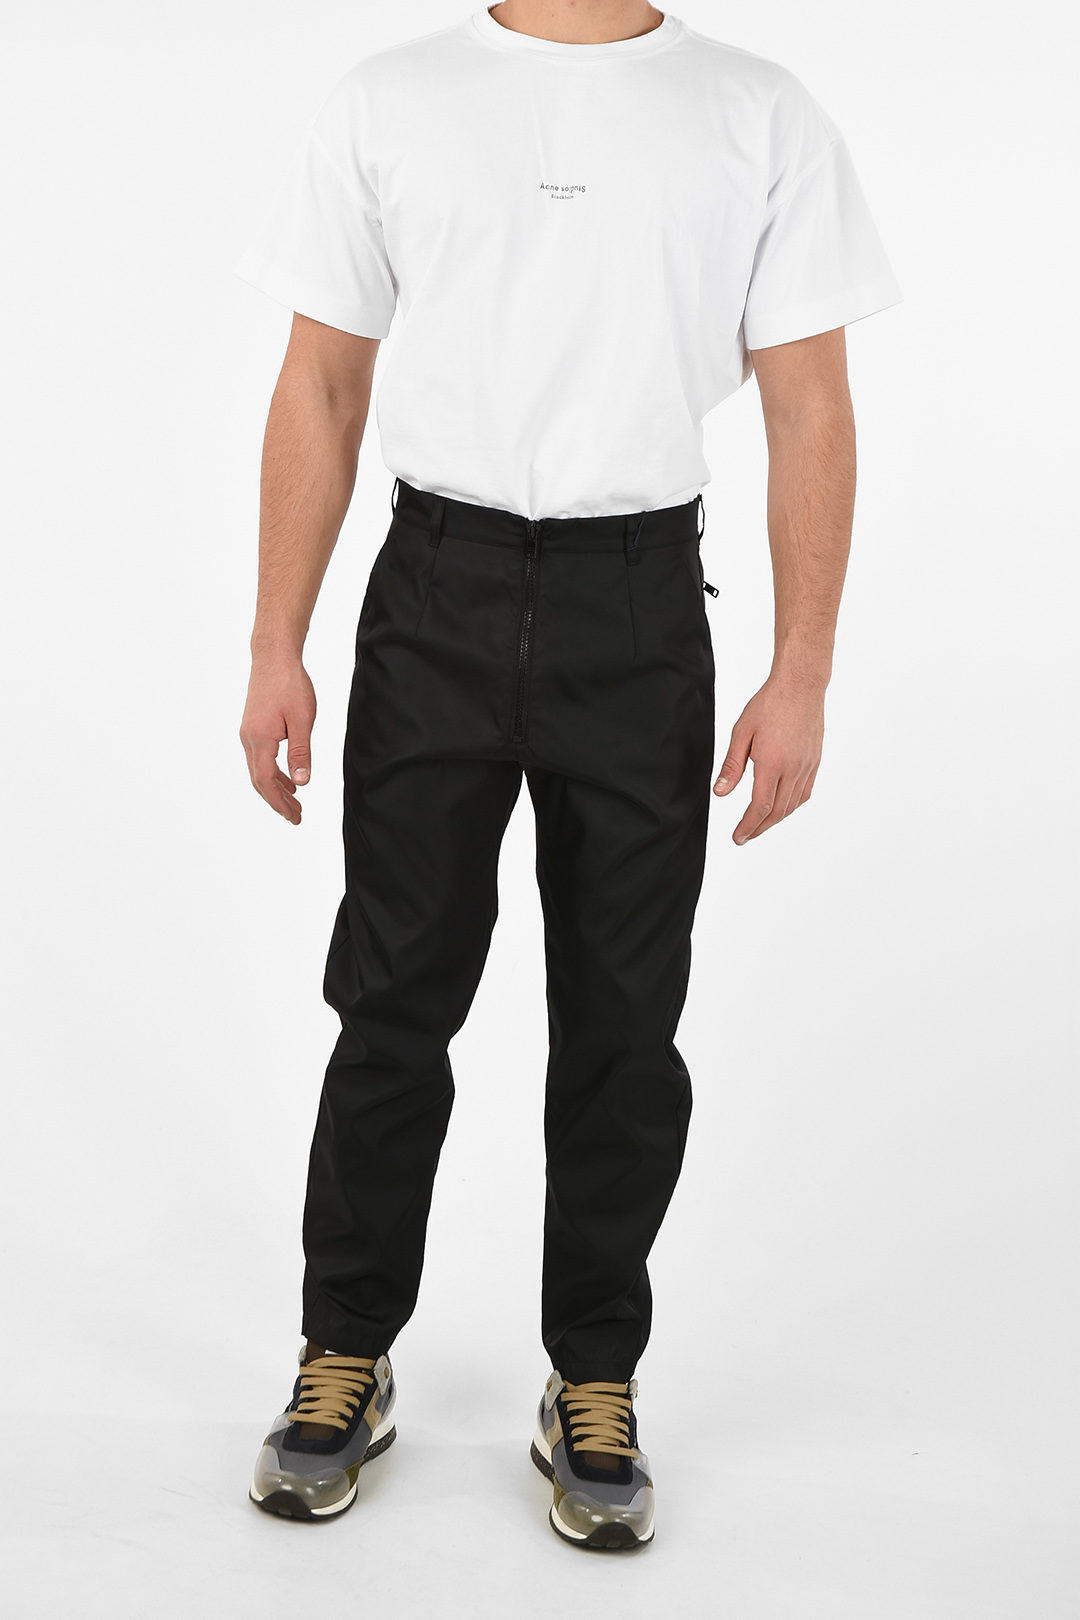 Mooie jurk sirene Muf Prada Technical Fabric Pants With Zip Ankle men - Glamood Outlet